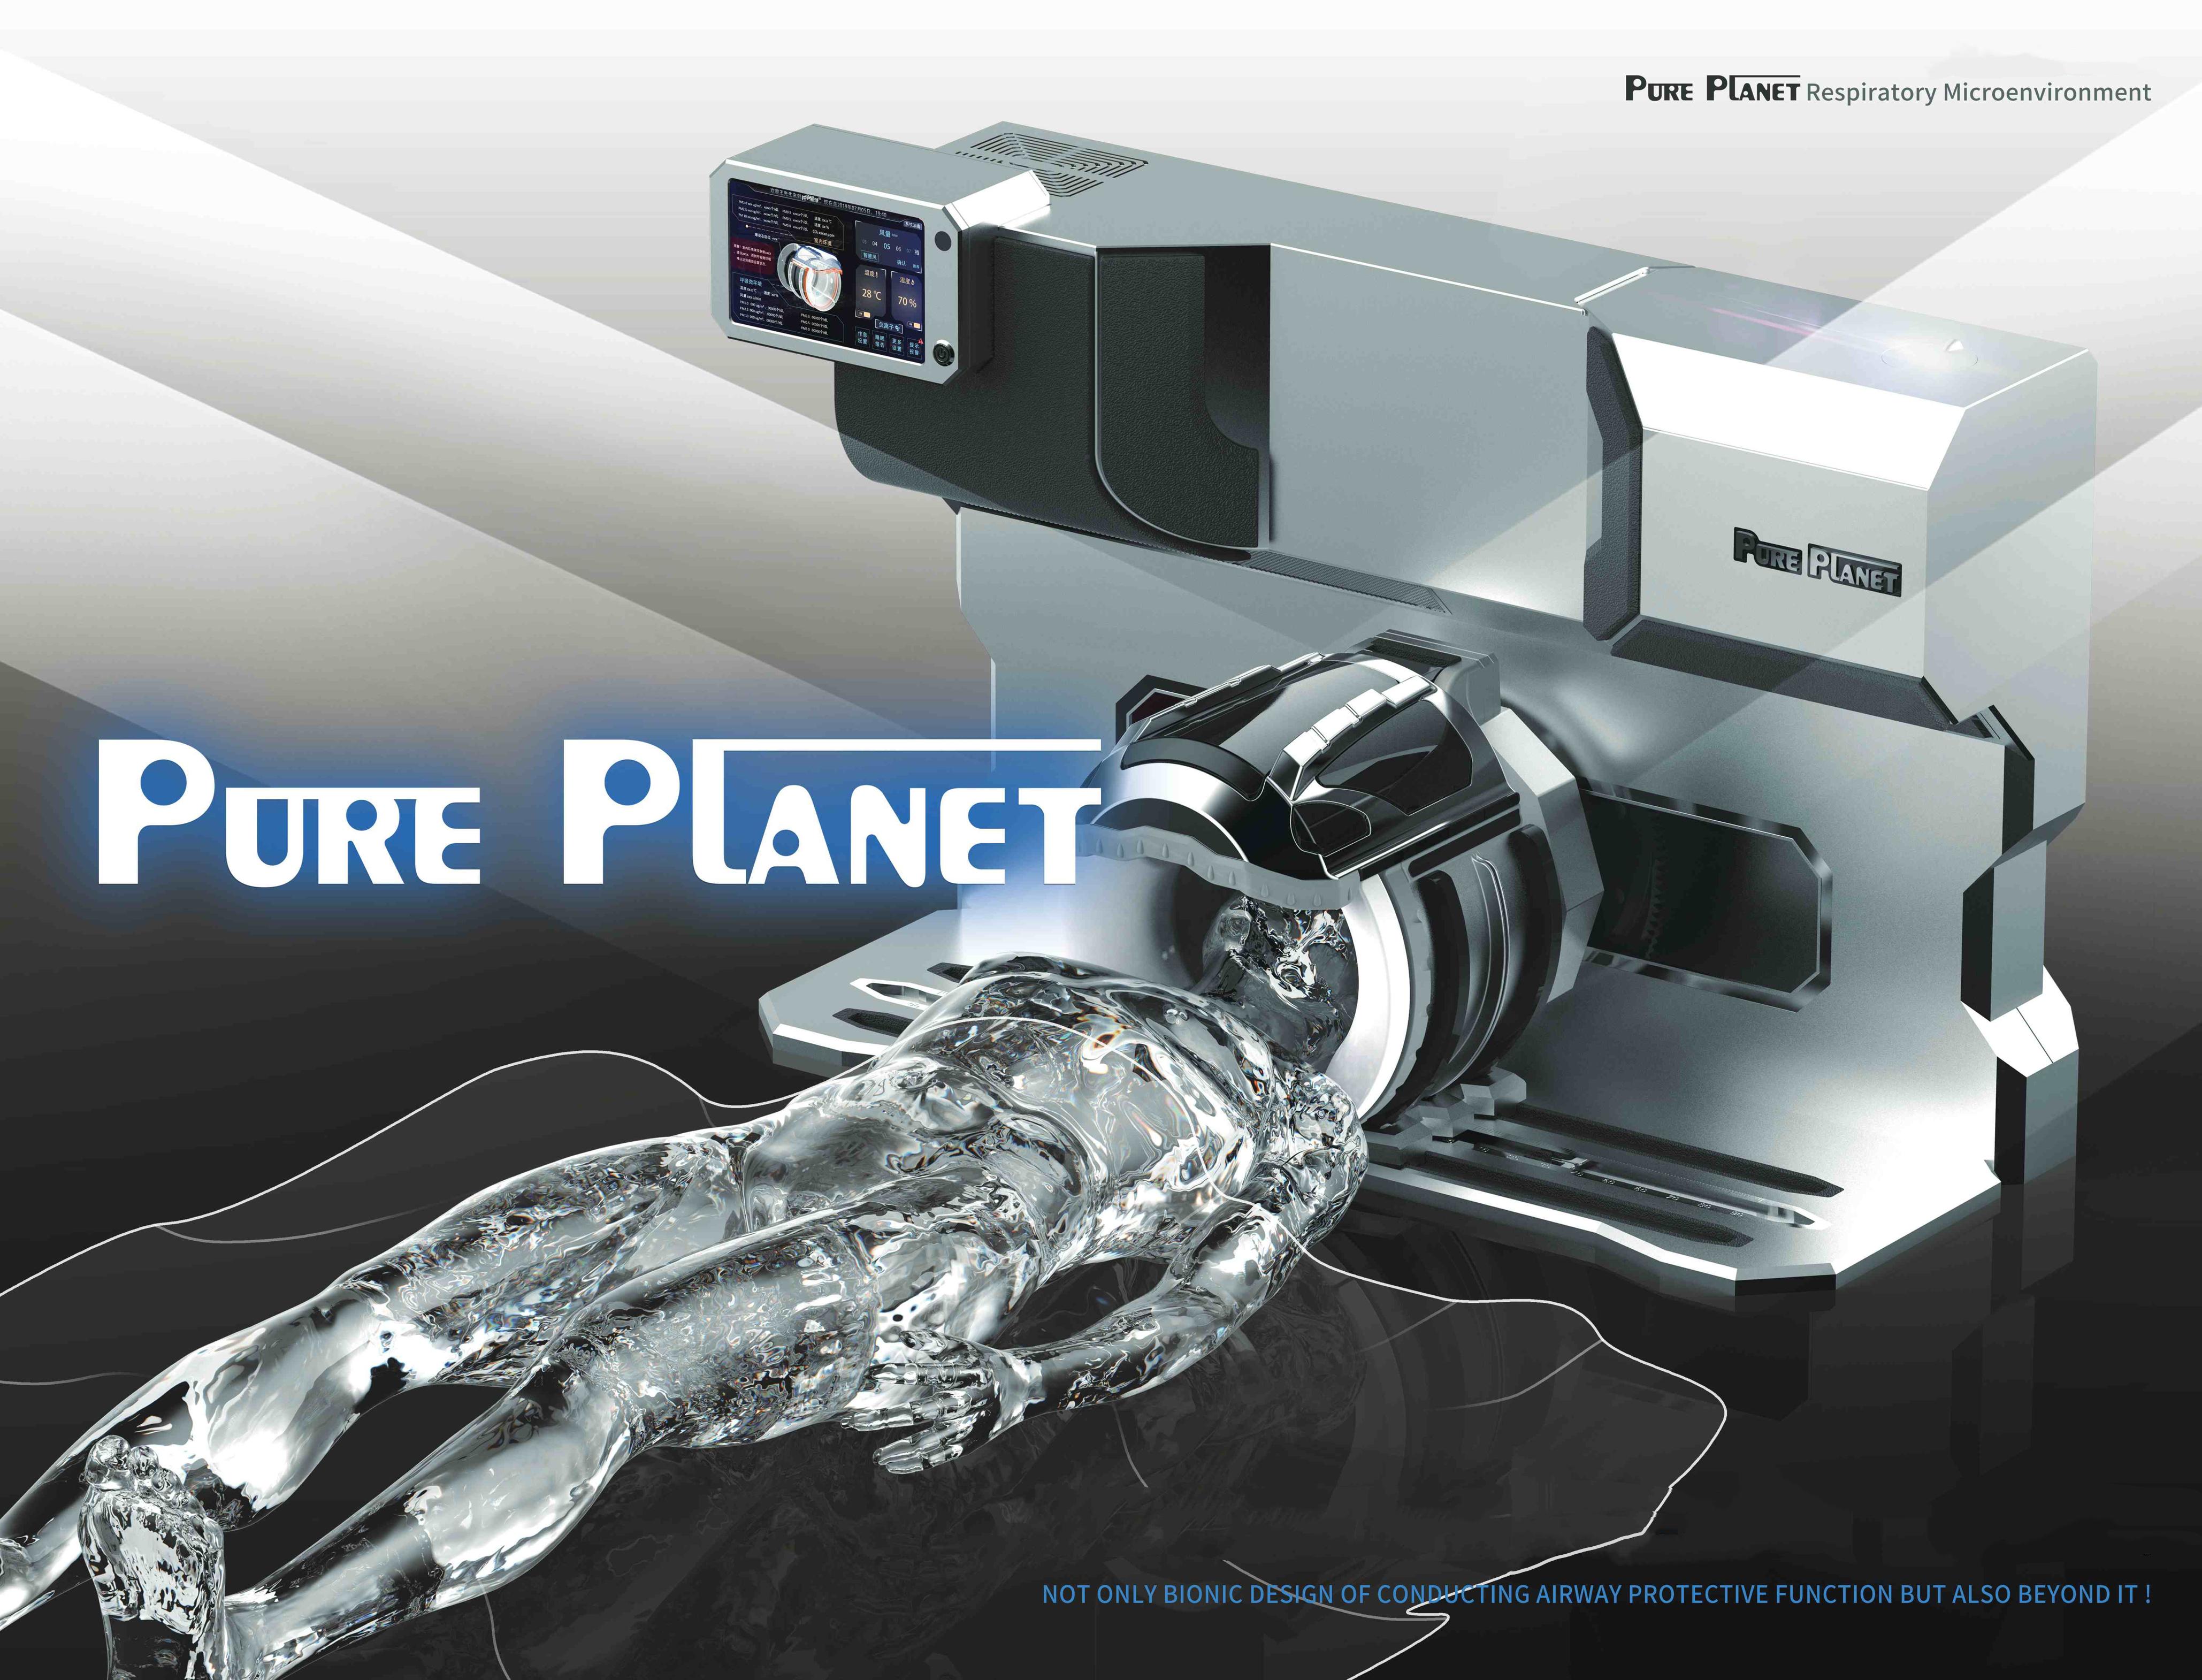 /pure-planet-sleep•-breath-microenvironment-system-product/